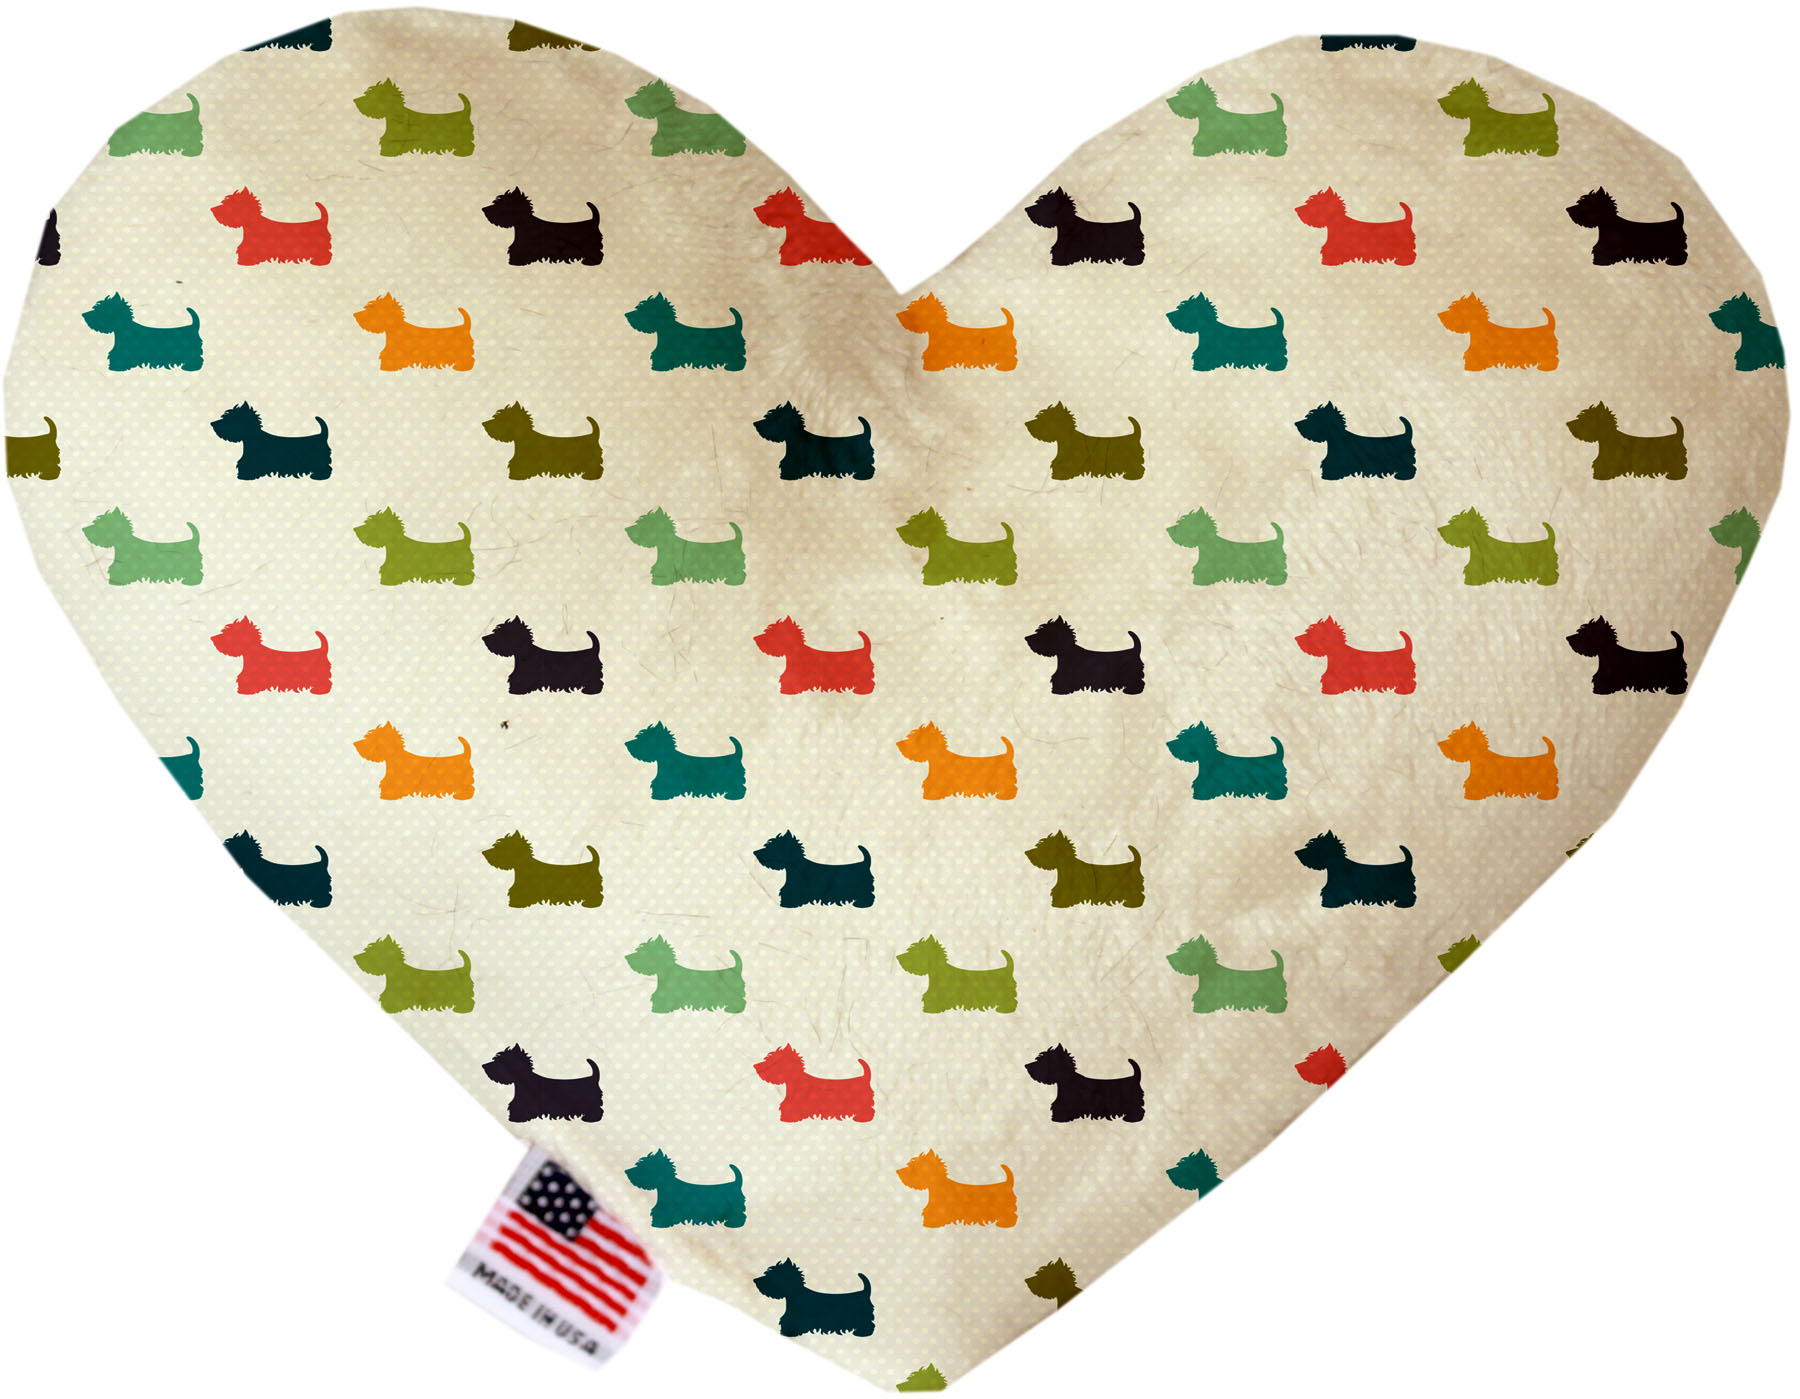 It is a Westie's World 6 inch Canvas Heart Dog Toy